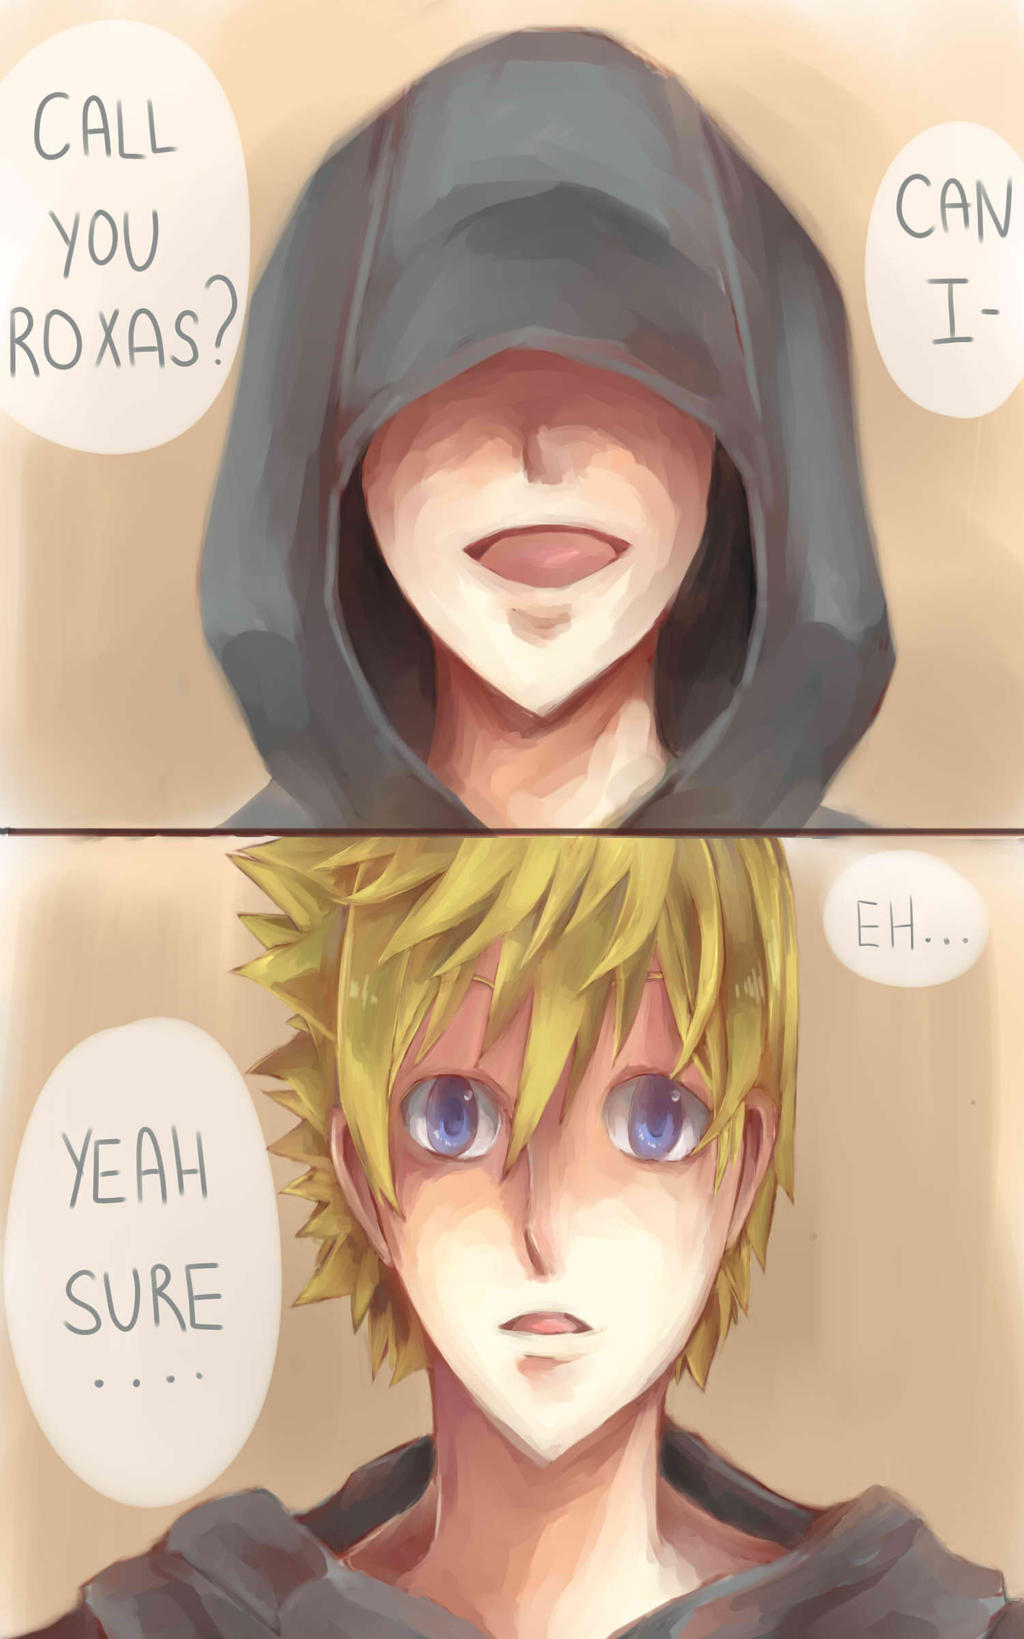 Day 024, Can I call you Roxas?